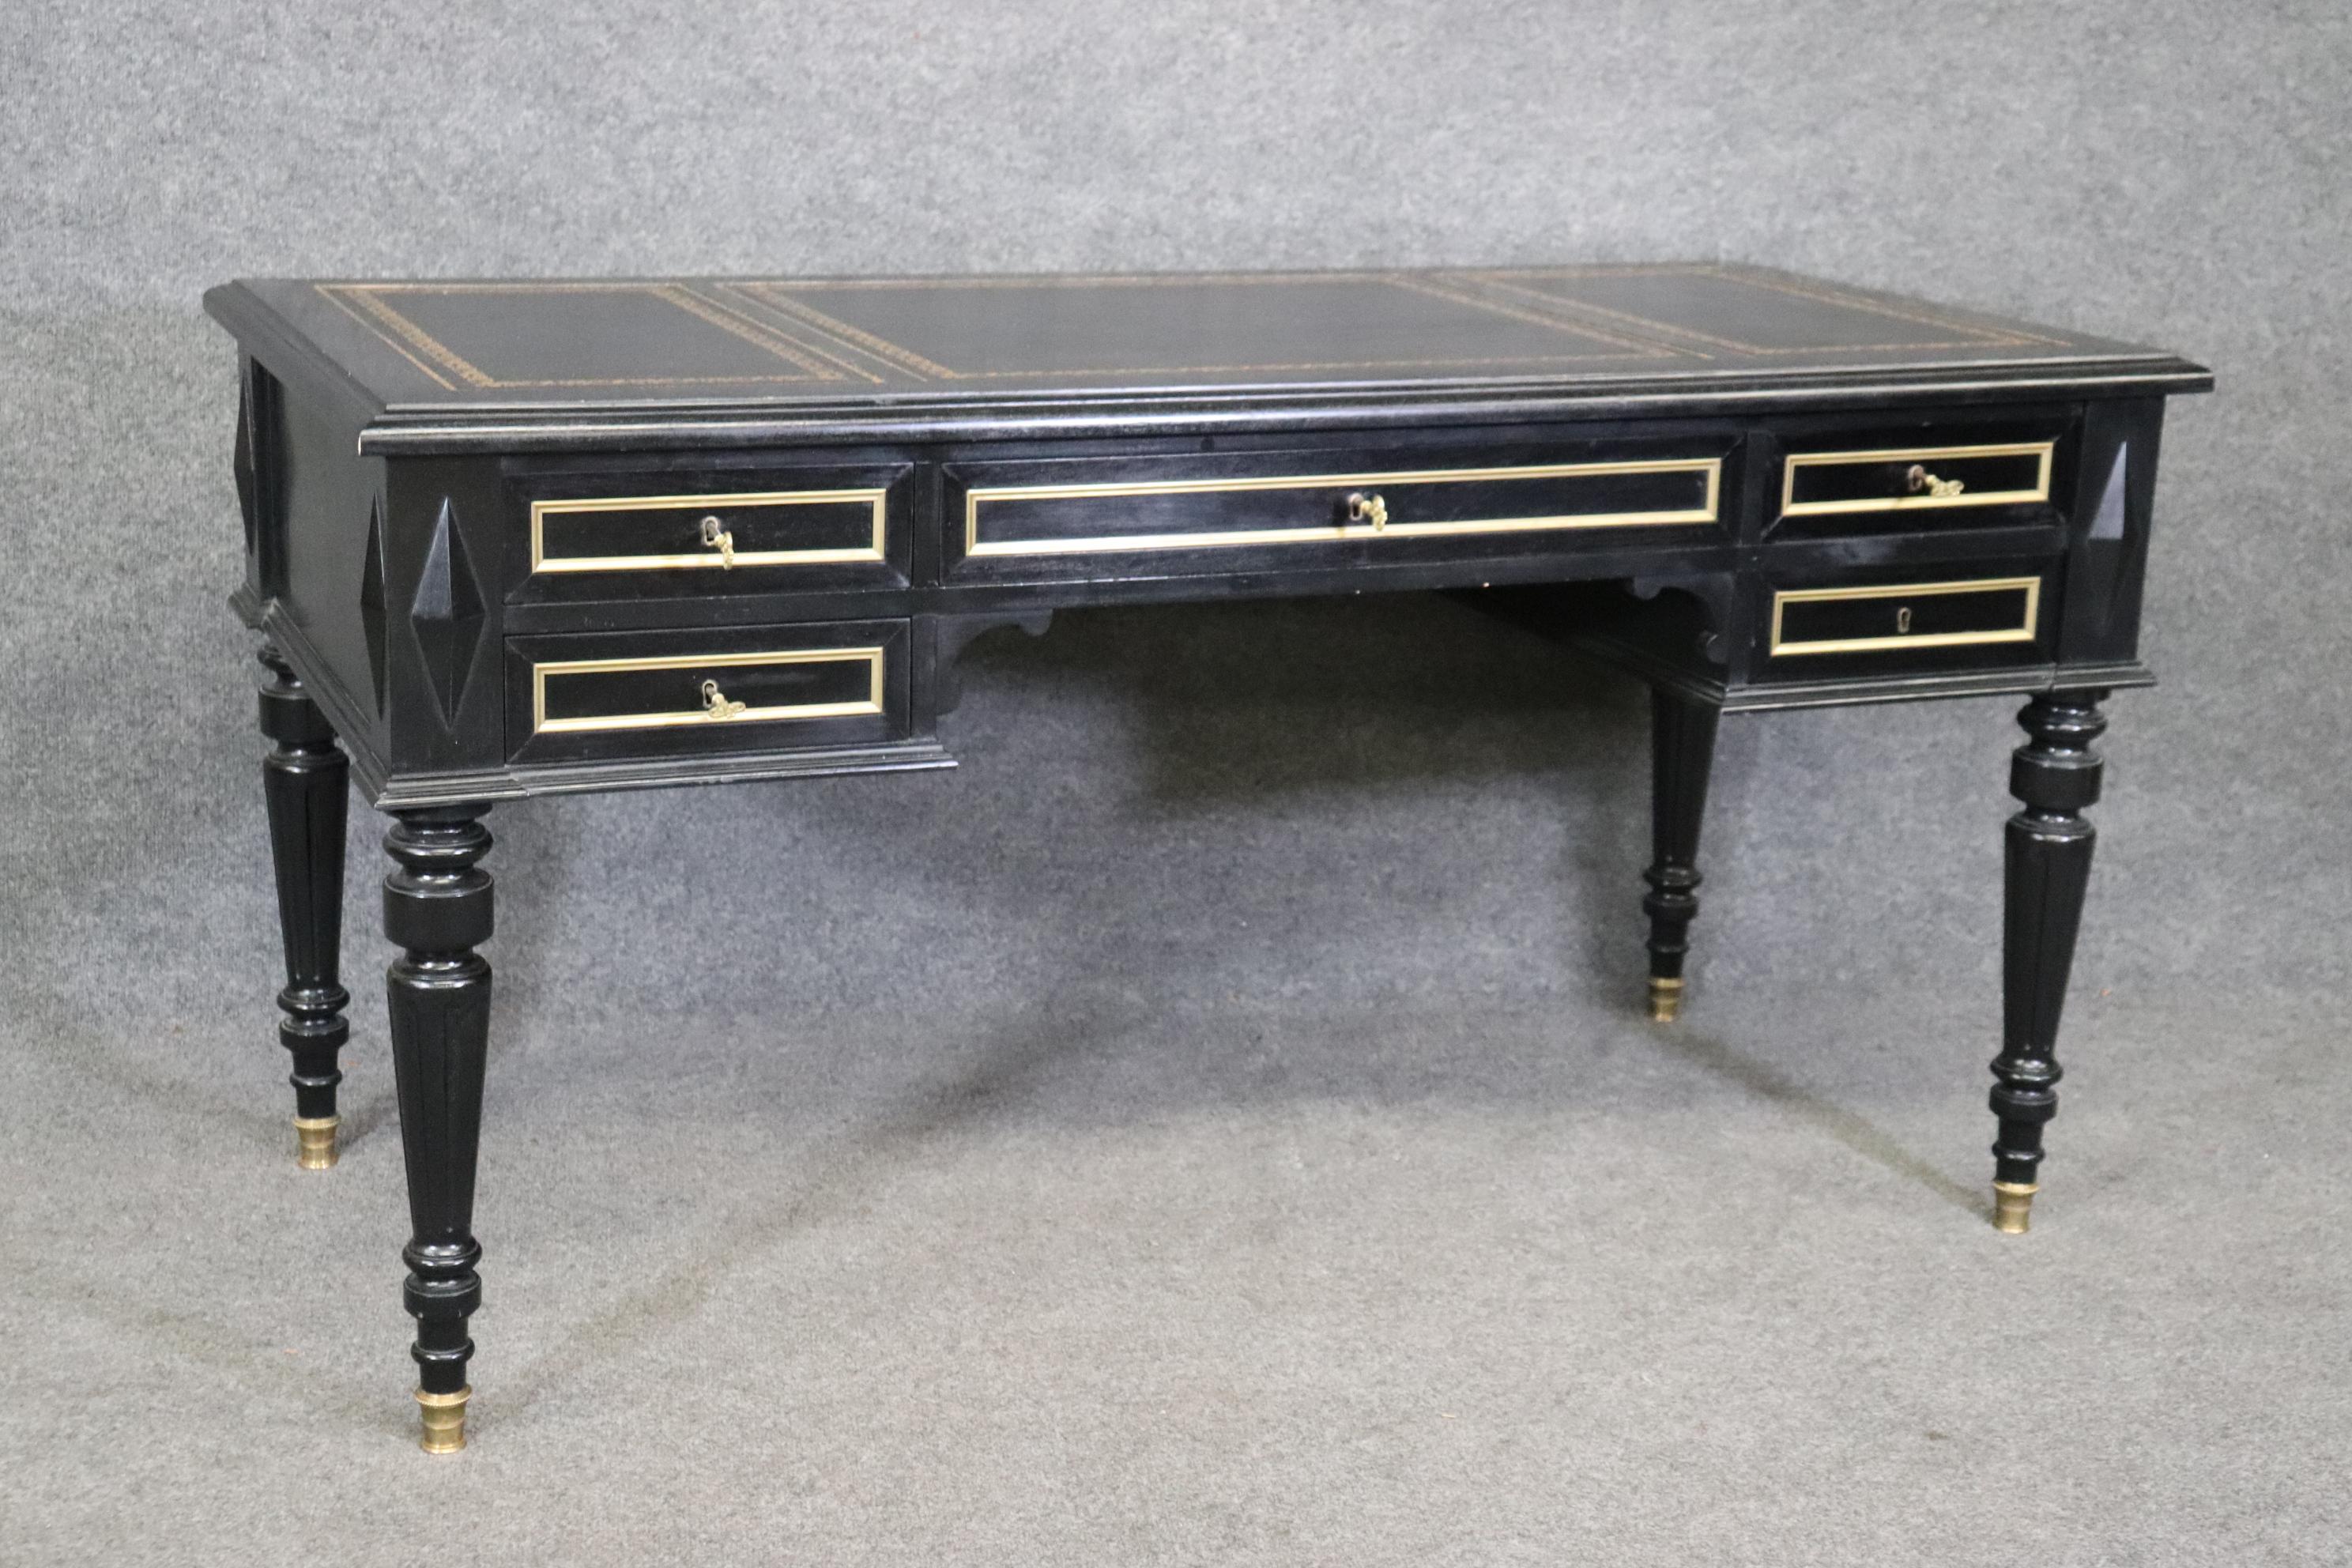 This is a gorgeous Baker quality brass trimmed desk with a wonderful gold embossed and tooled leather top. The desk is ebonized in black lacquer and features remarkable build quality and superb details in brass such as trim durrounding each of the 5